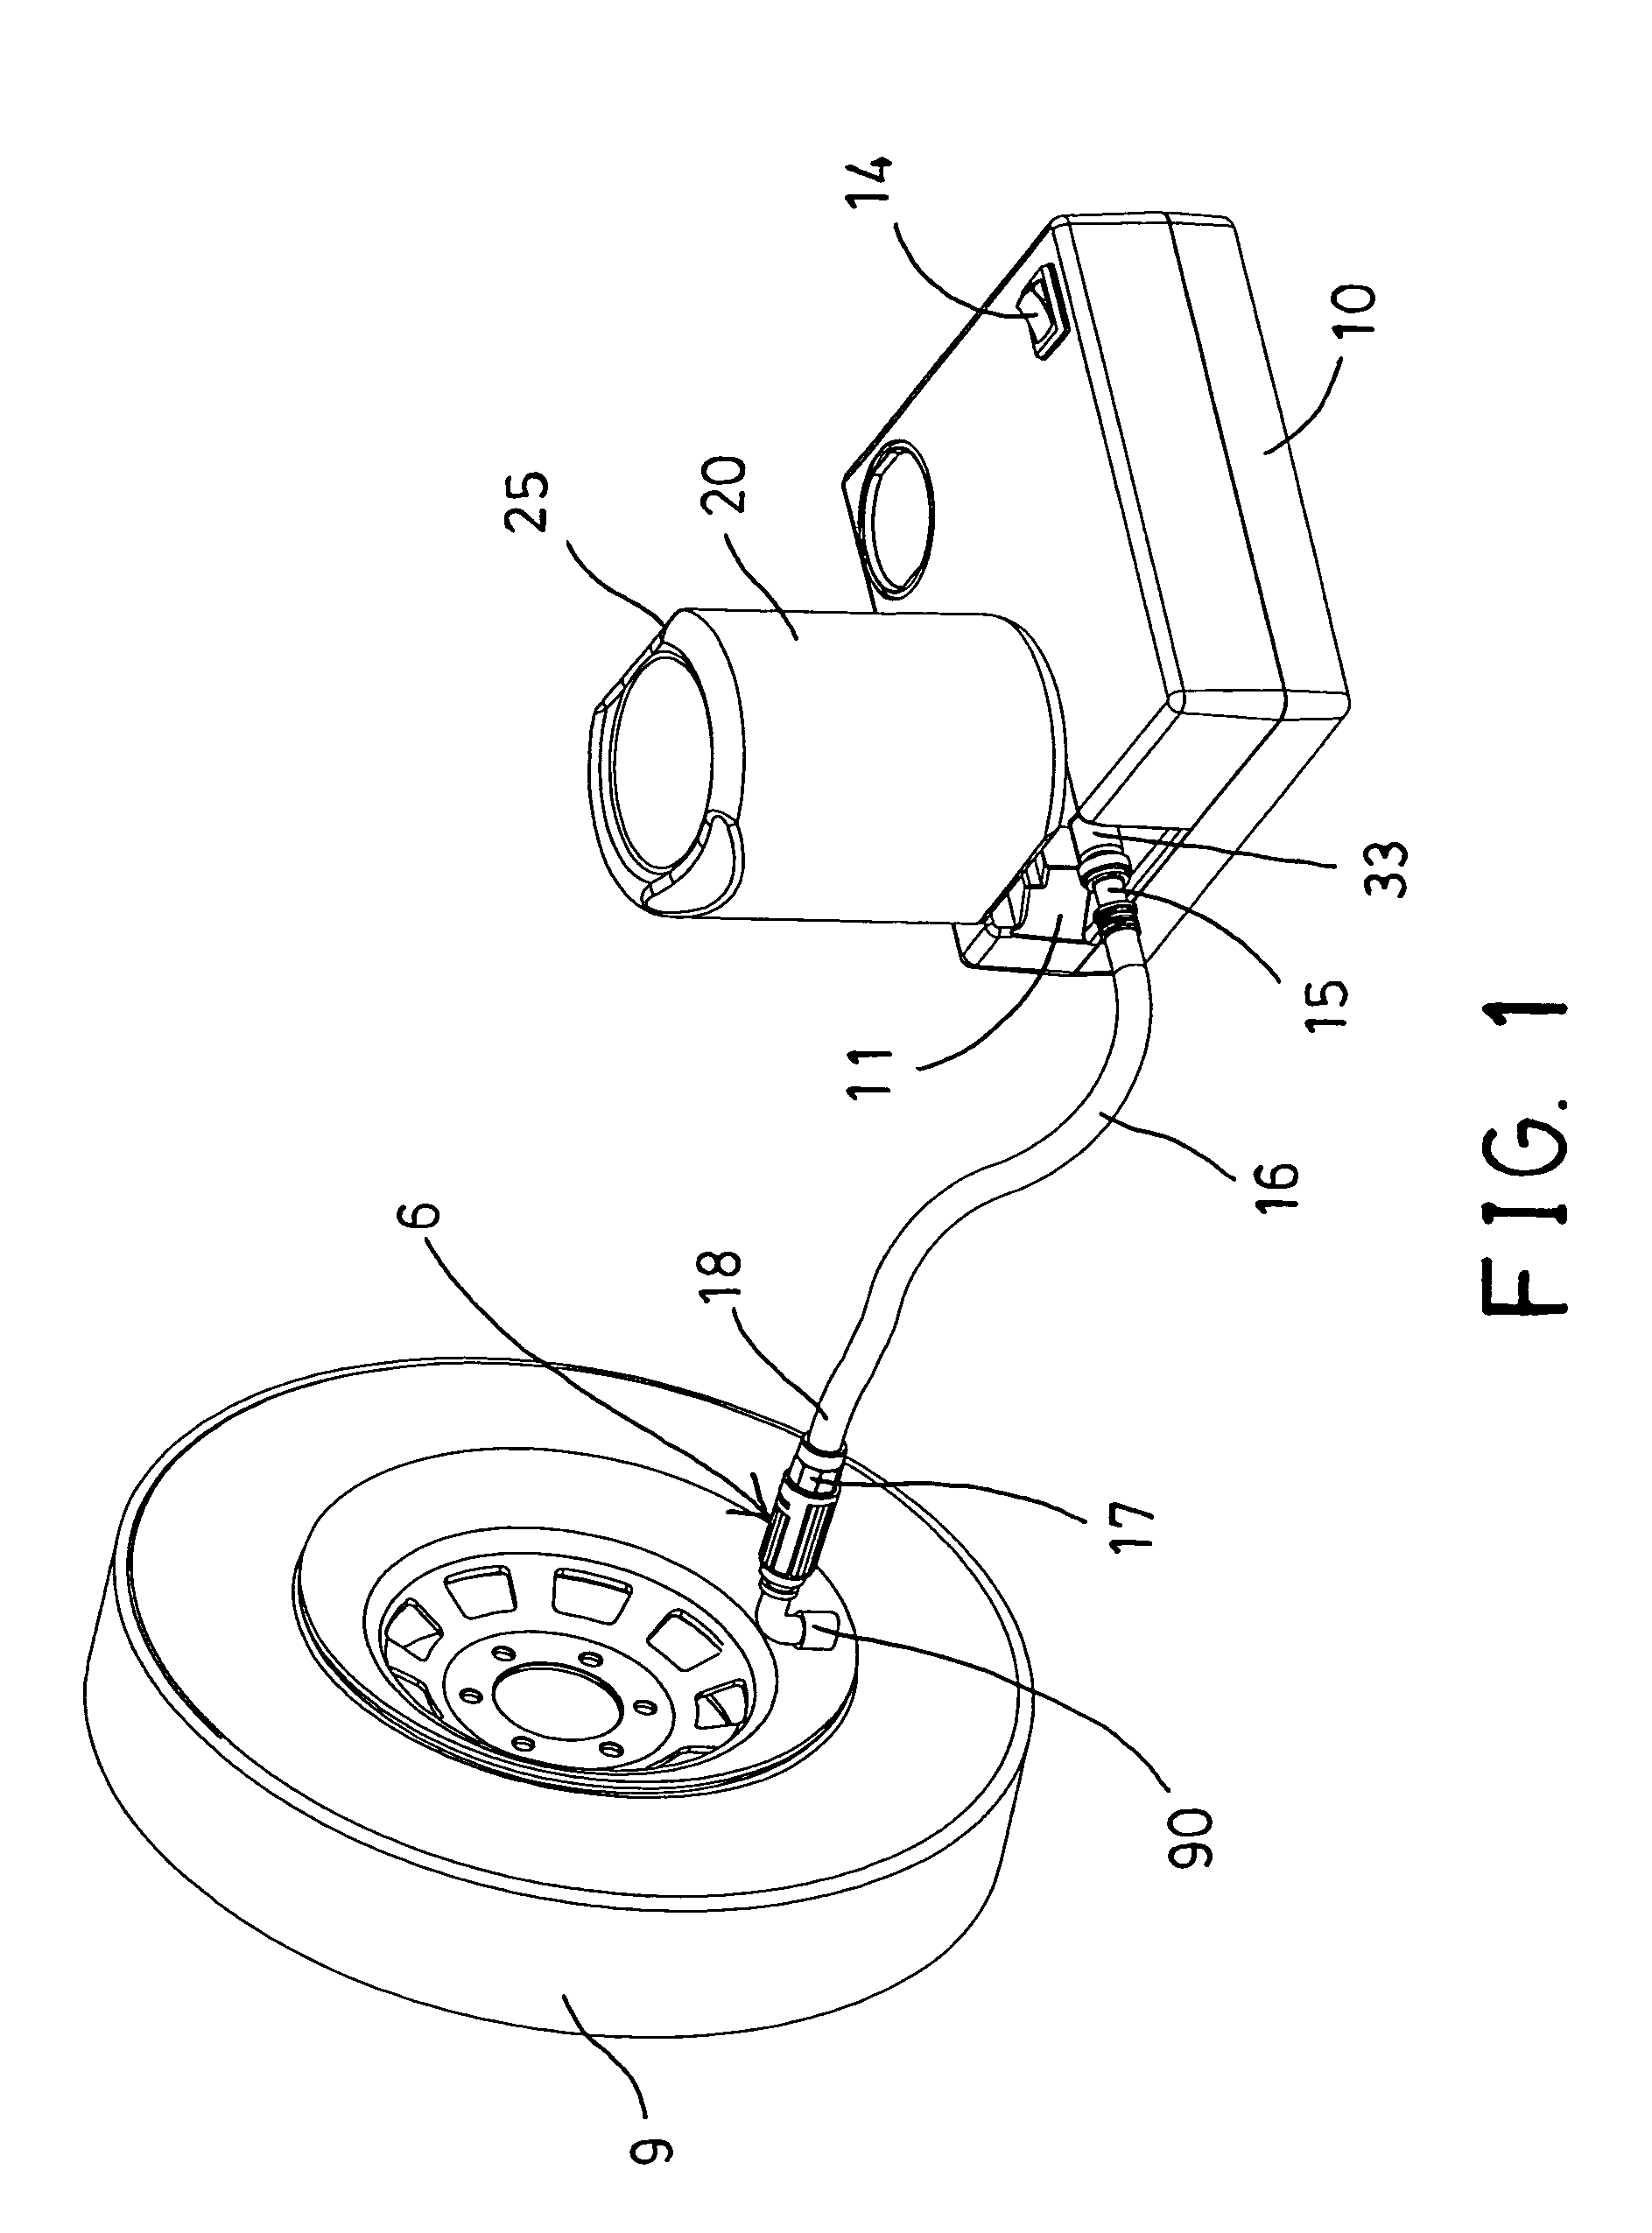 Device for sealing and inflating inflatable object